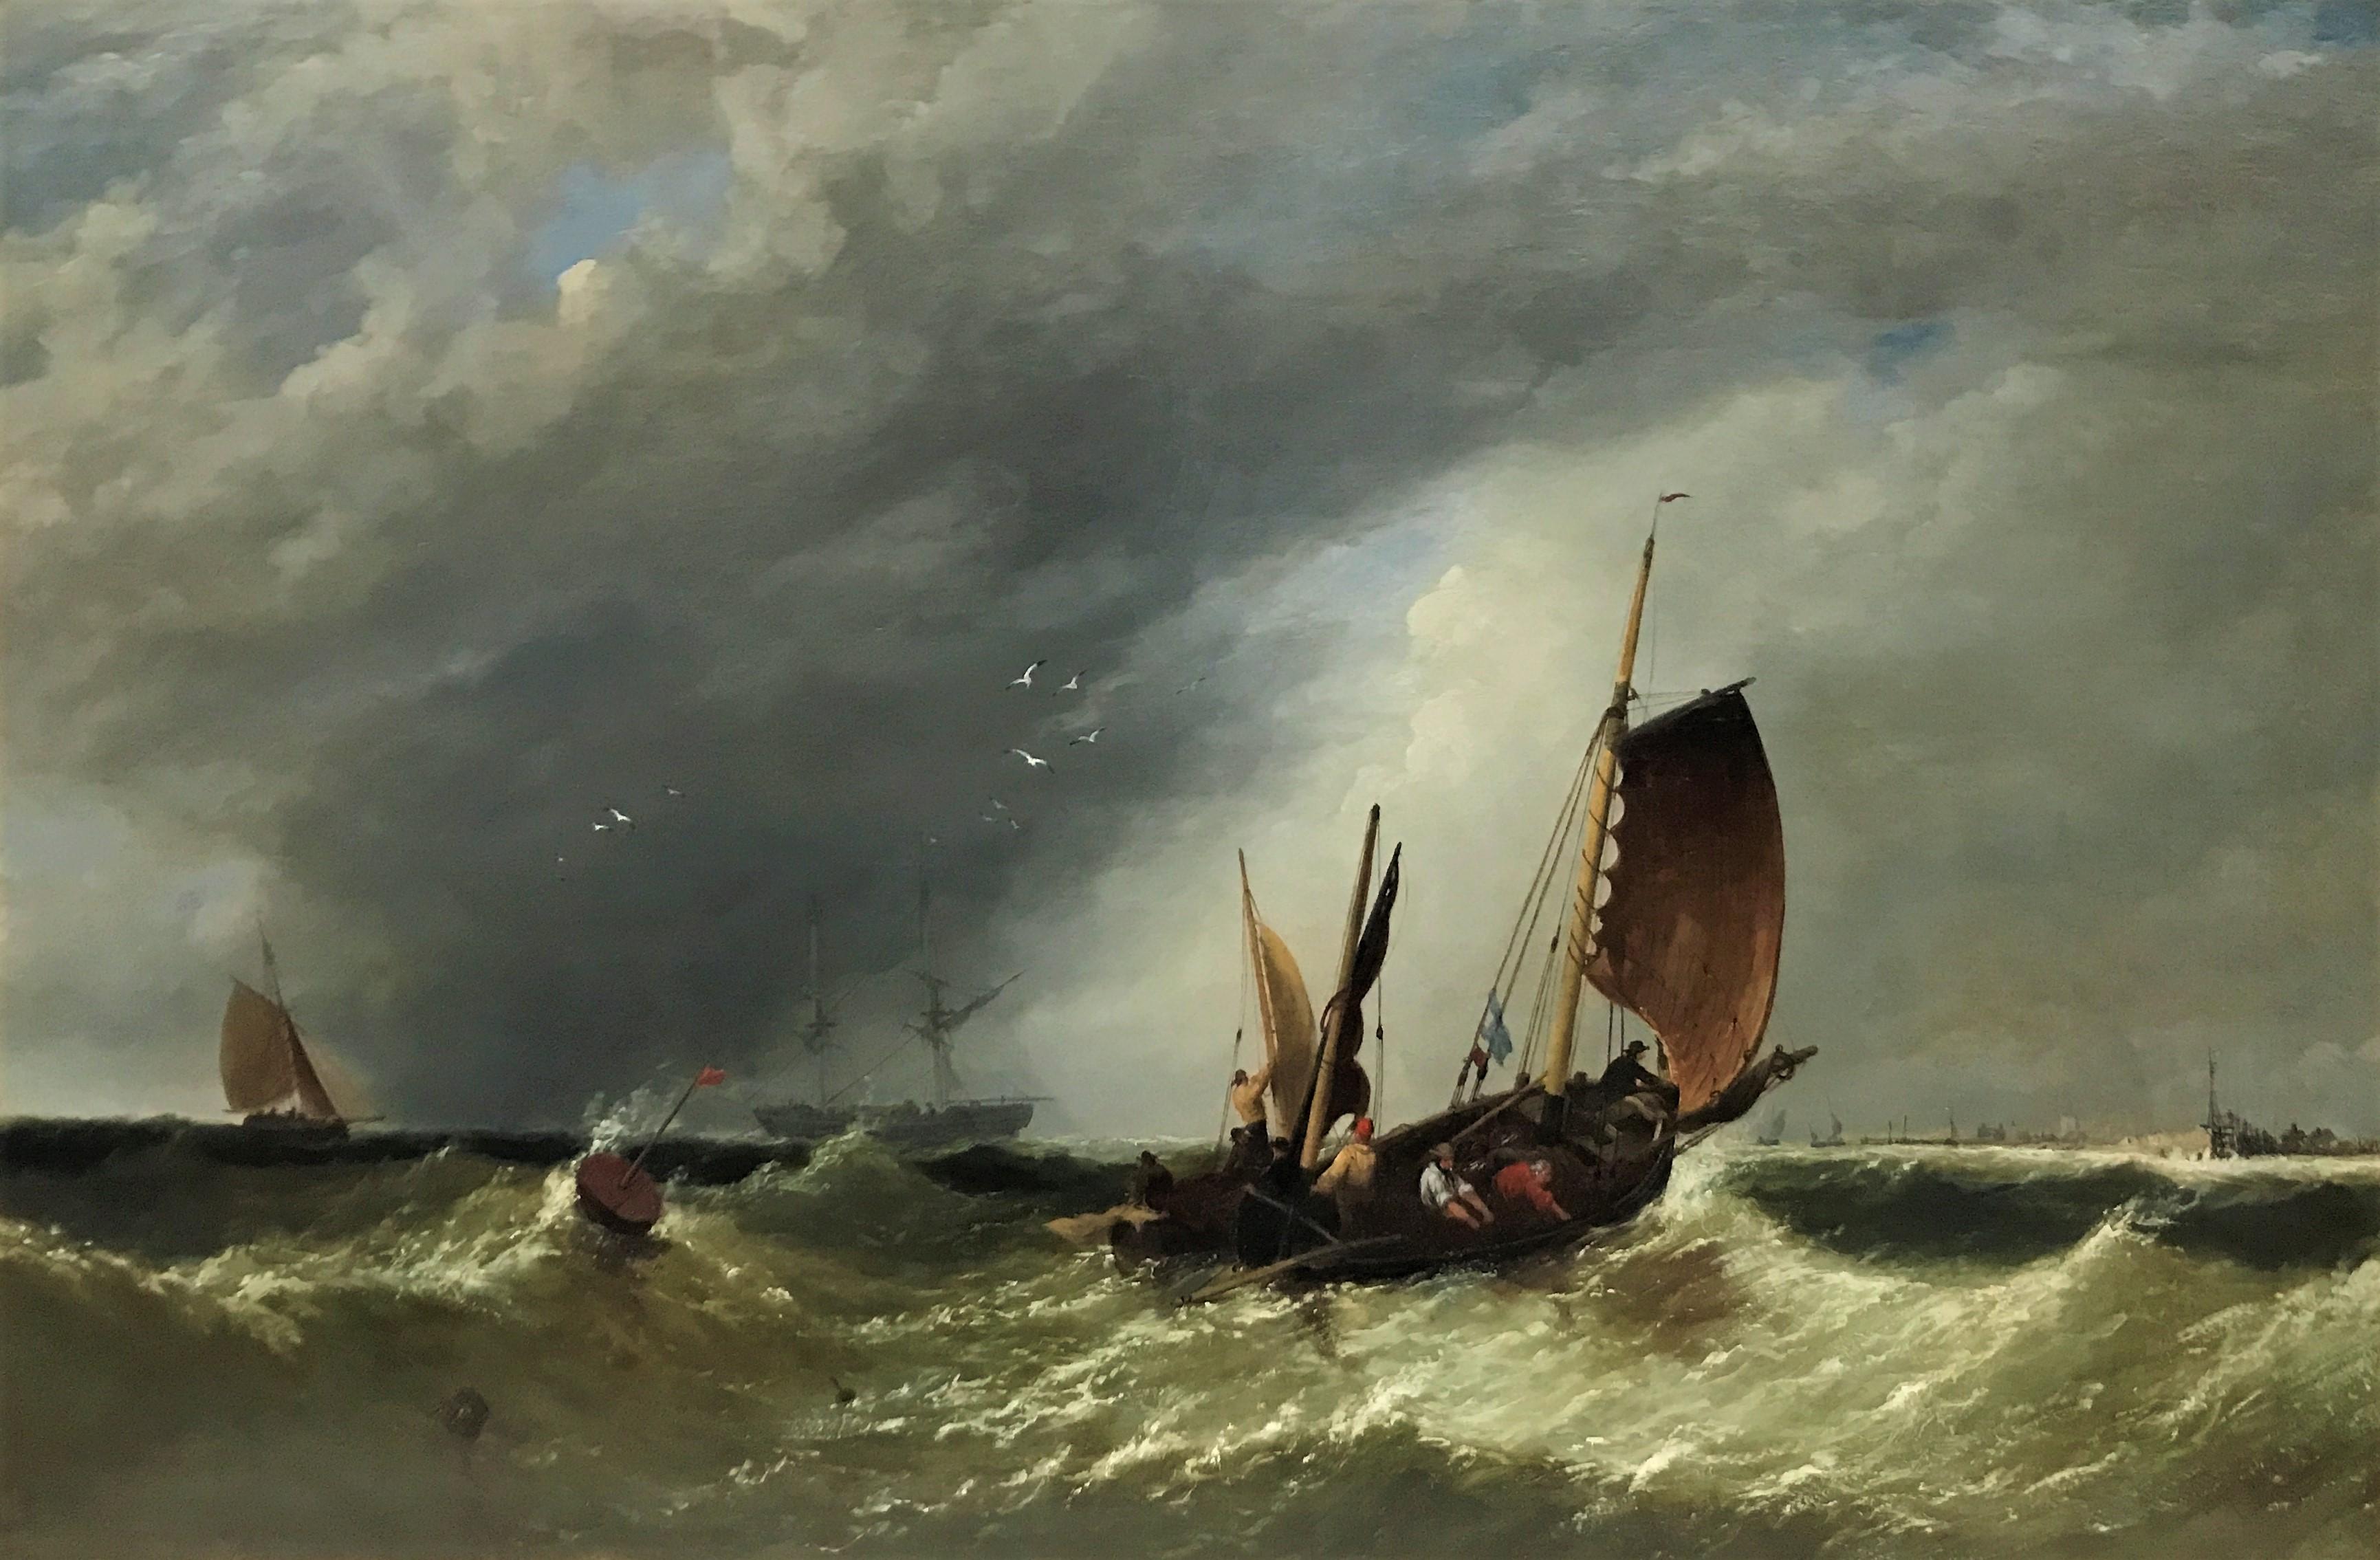 James Meadows Sr. Landscape Painting - "Stormy Seas”, seascape of small sailboats tossed on the waves, oil on canvas